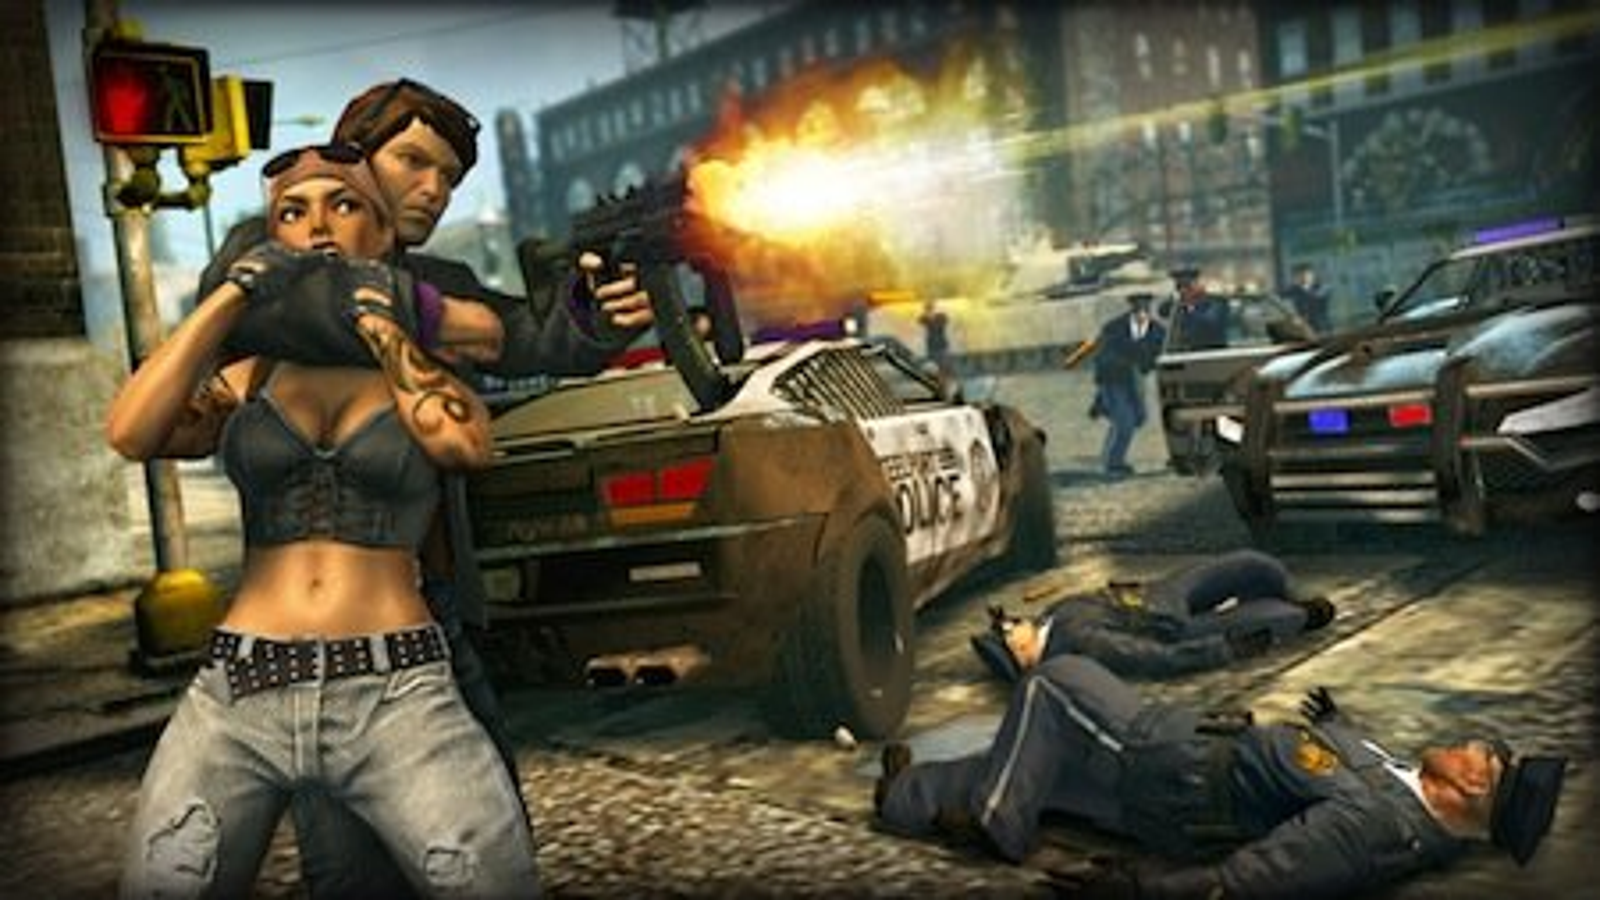 Saints Row: The Third Remastered is coming to Steam this month